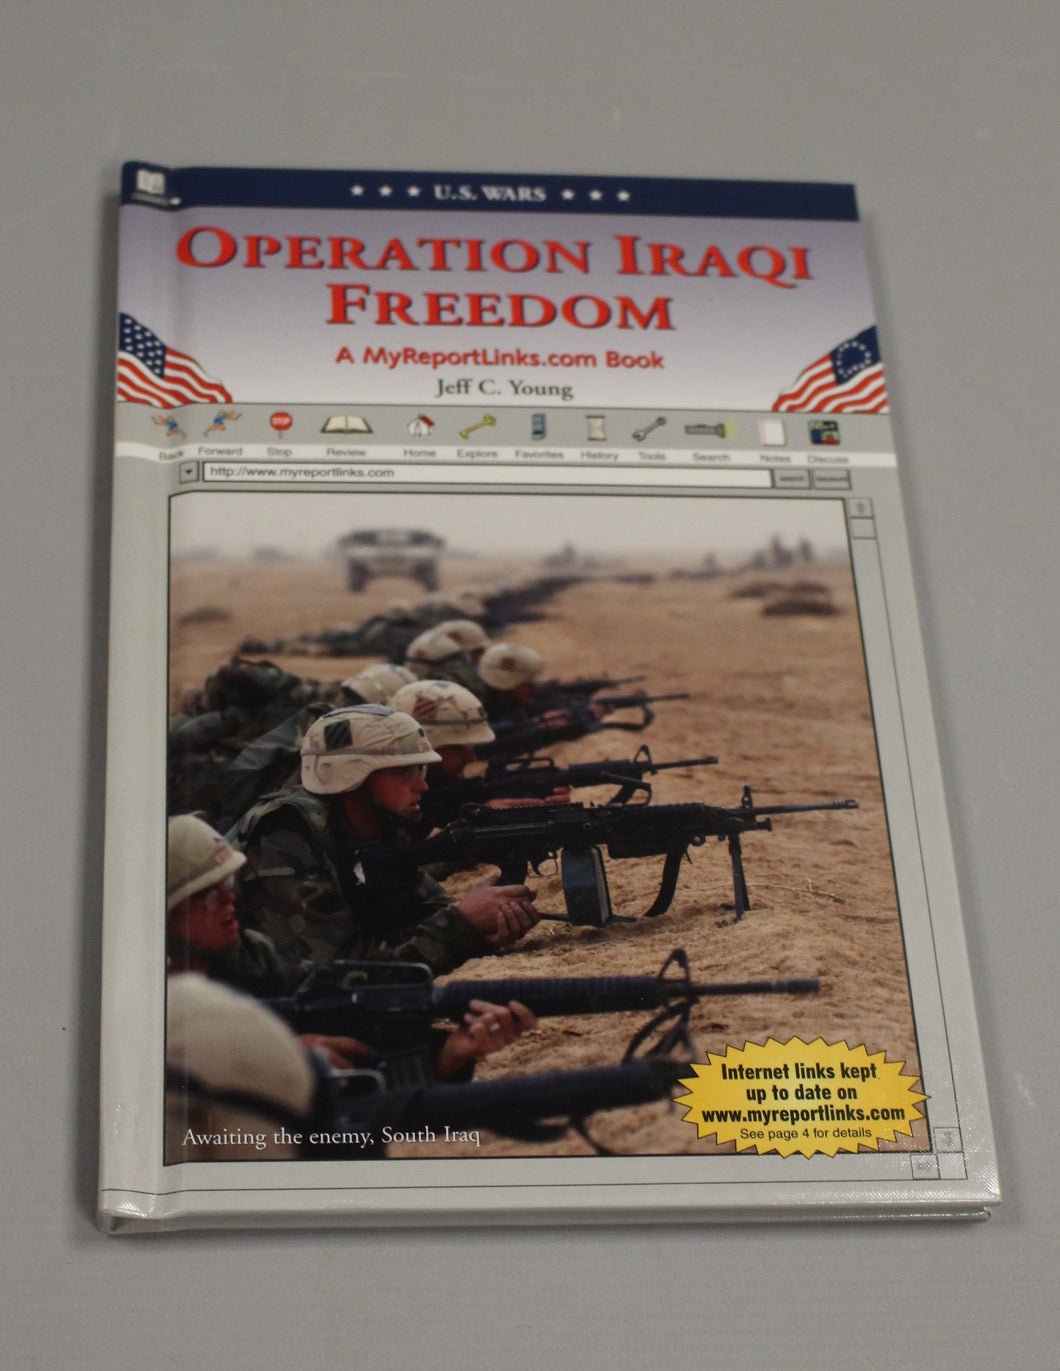 Operation Iraqi Freedom by Jeff C. Young